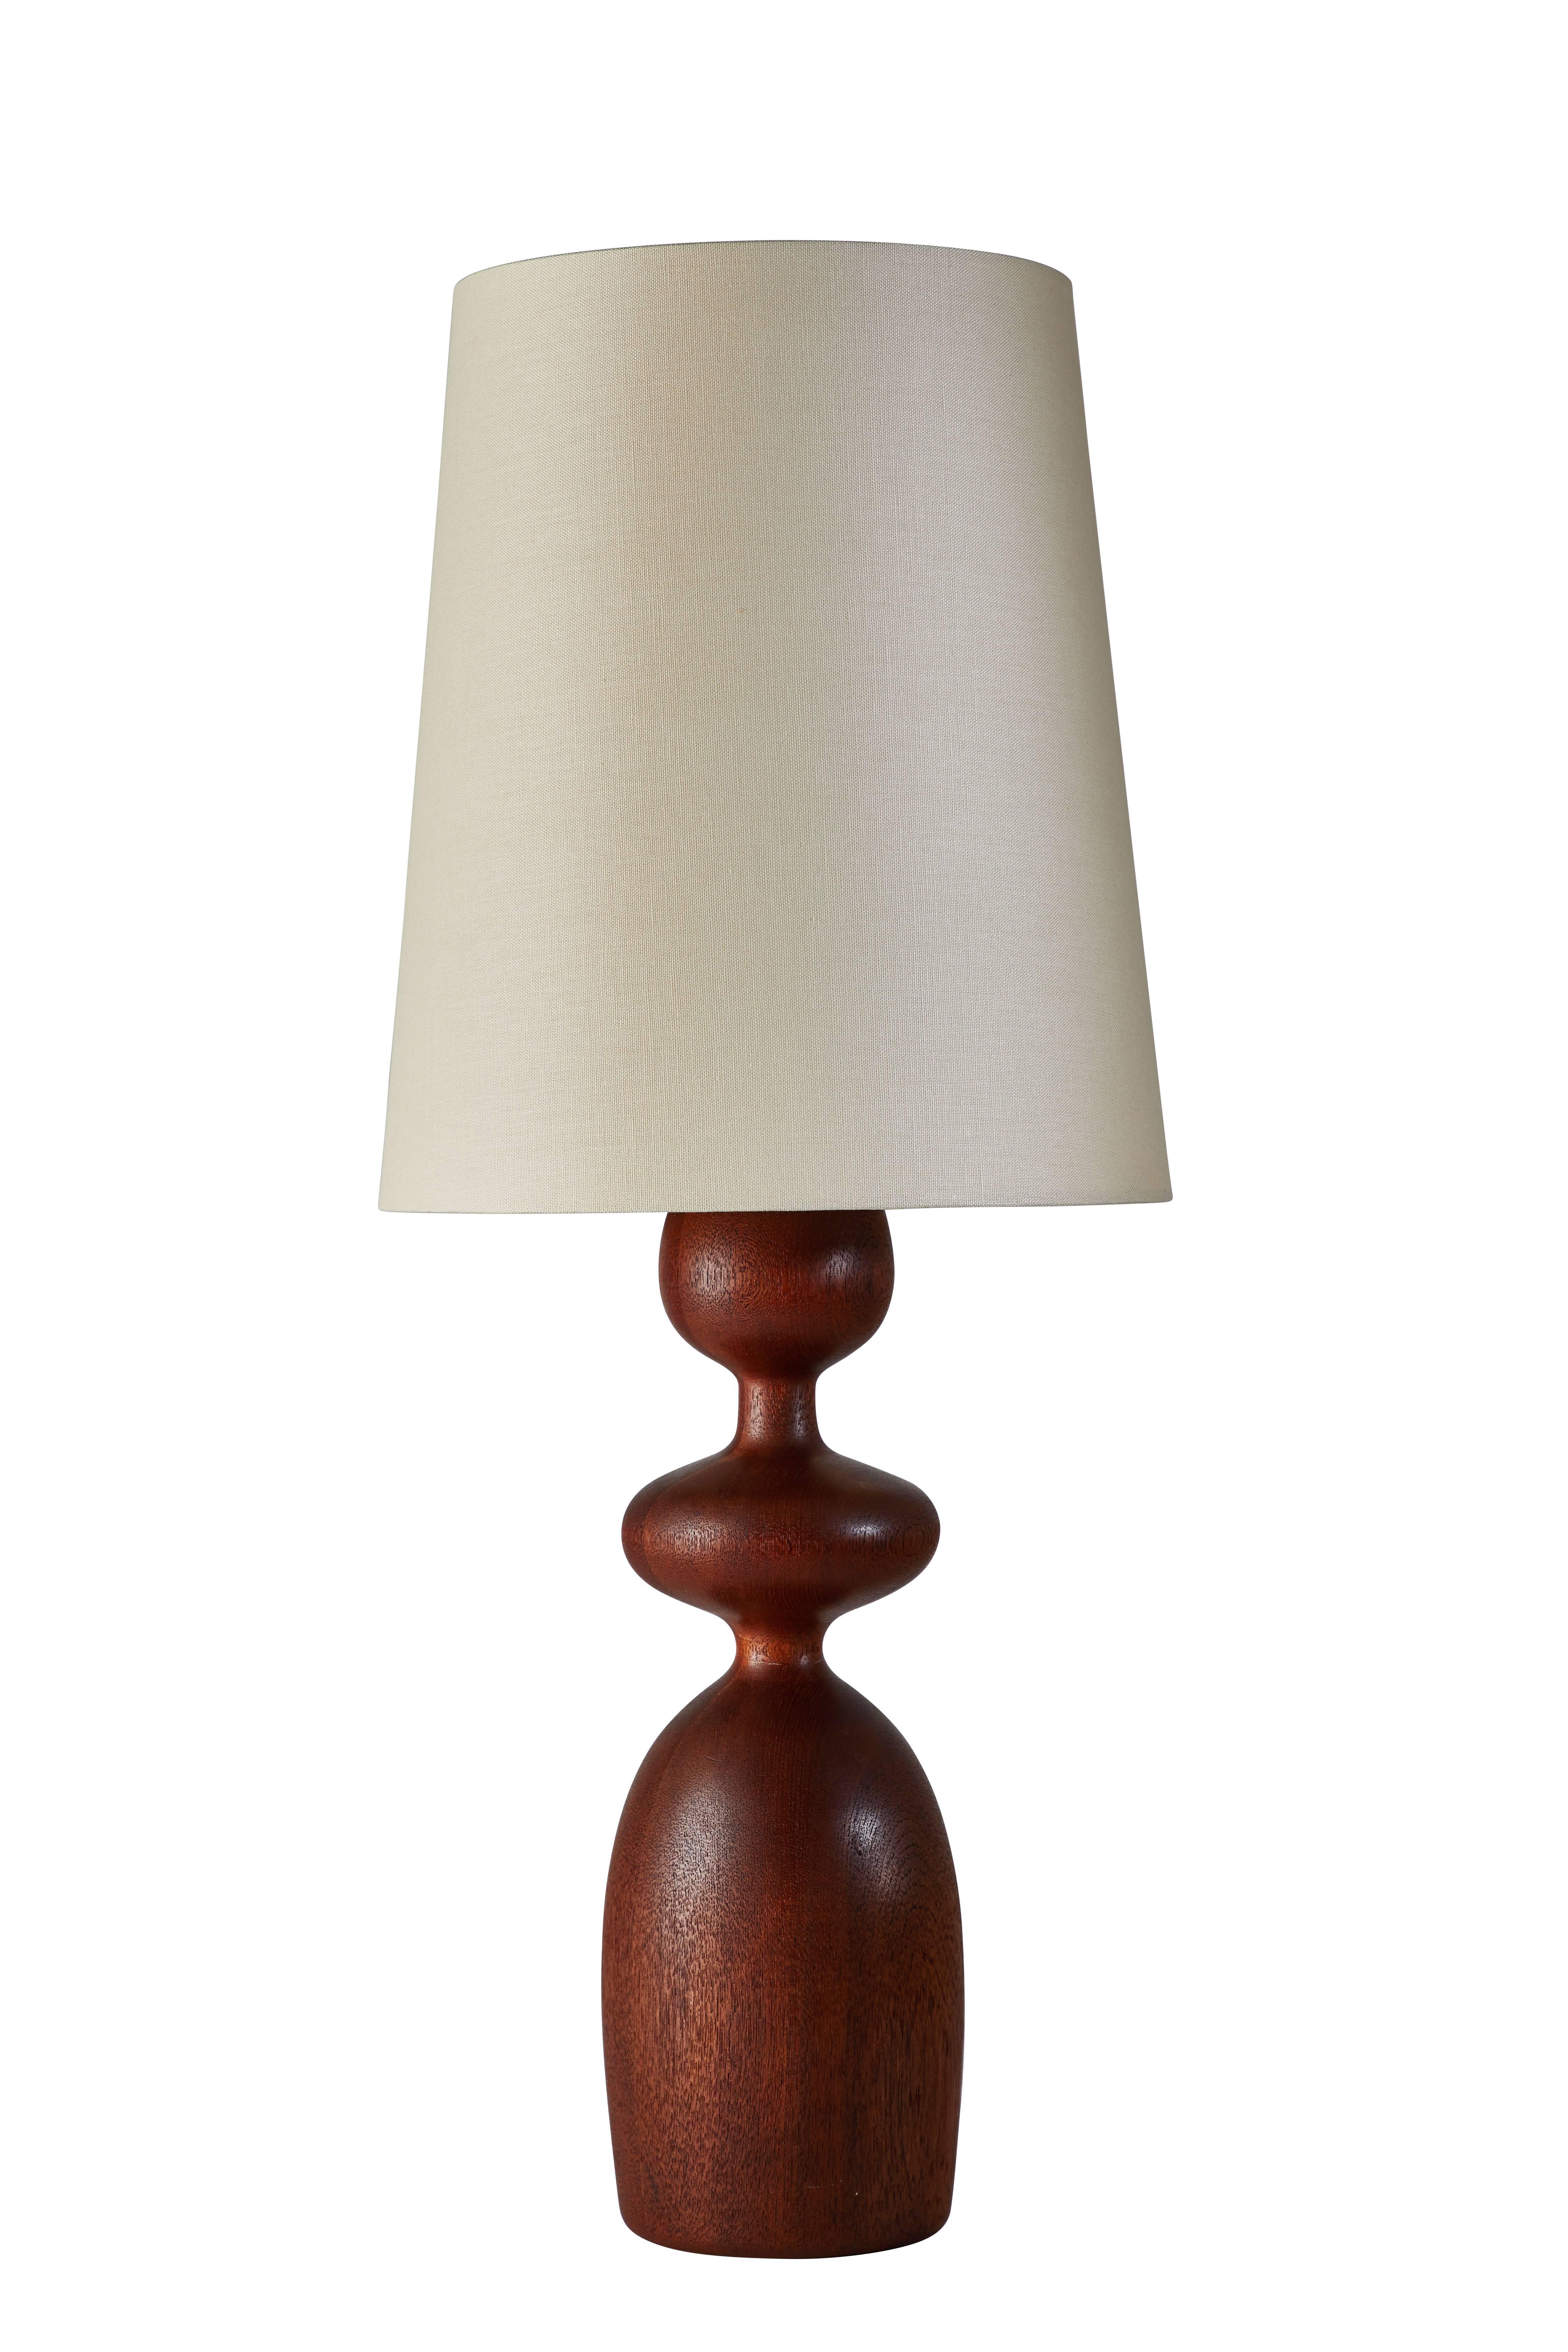 Sculpted teak Danish table lamp manufactured in Denmark circa 1960. Includes custom linen shade. Original cord. Shade measure 15 inches in height, 10 inches in diameter. Takes one E-27 75w maximum bulb
